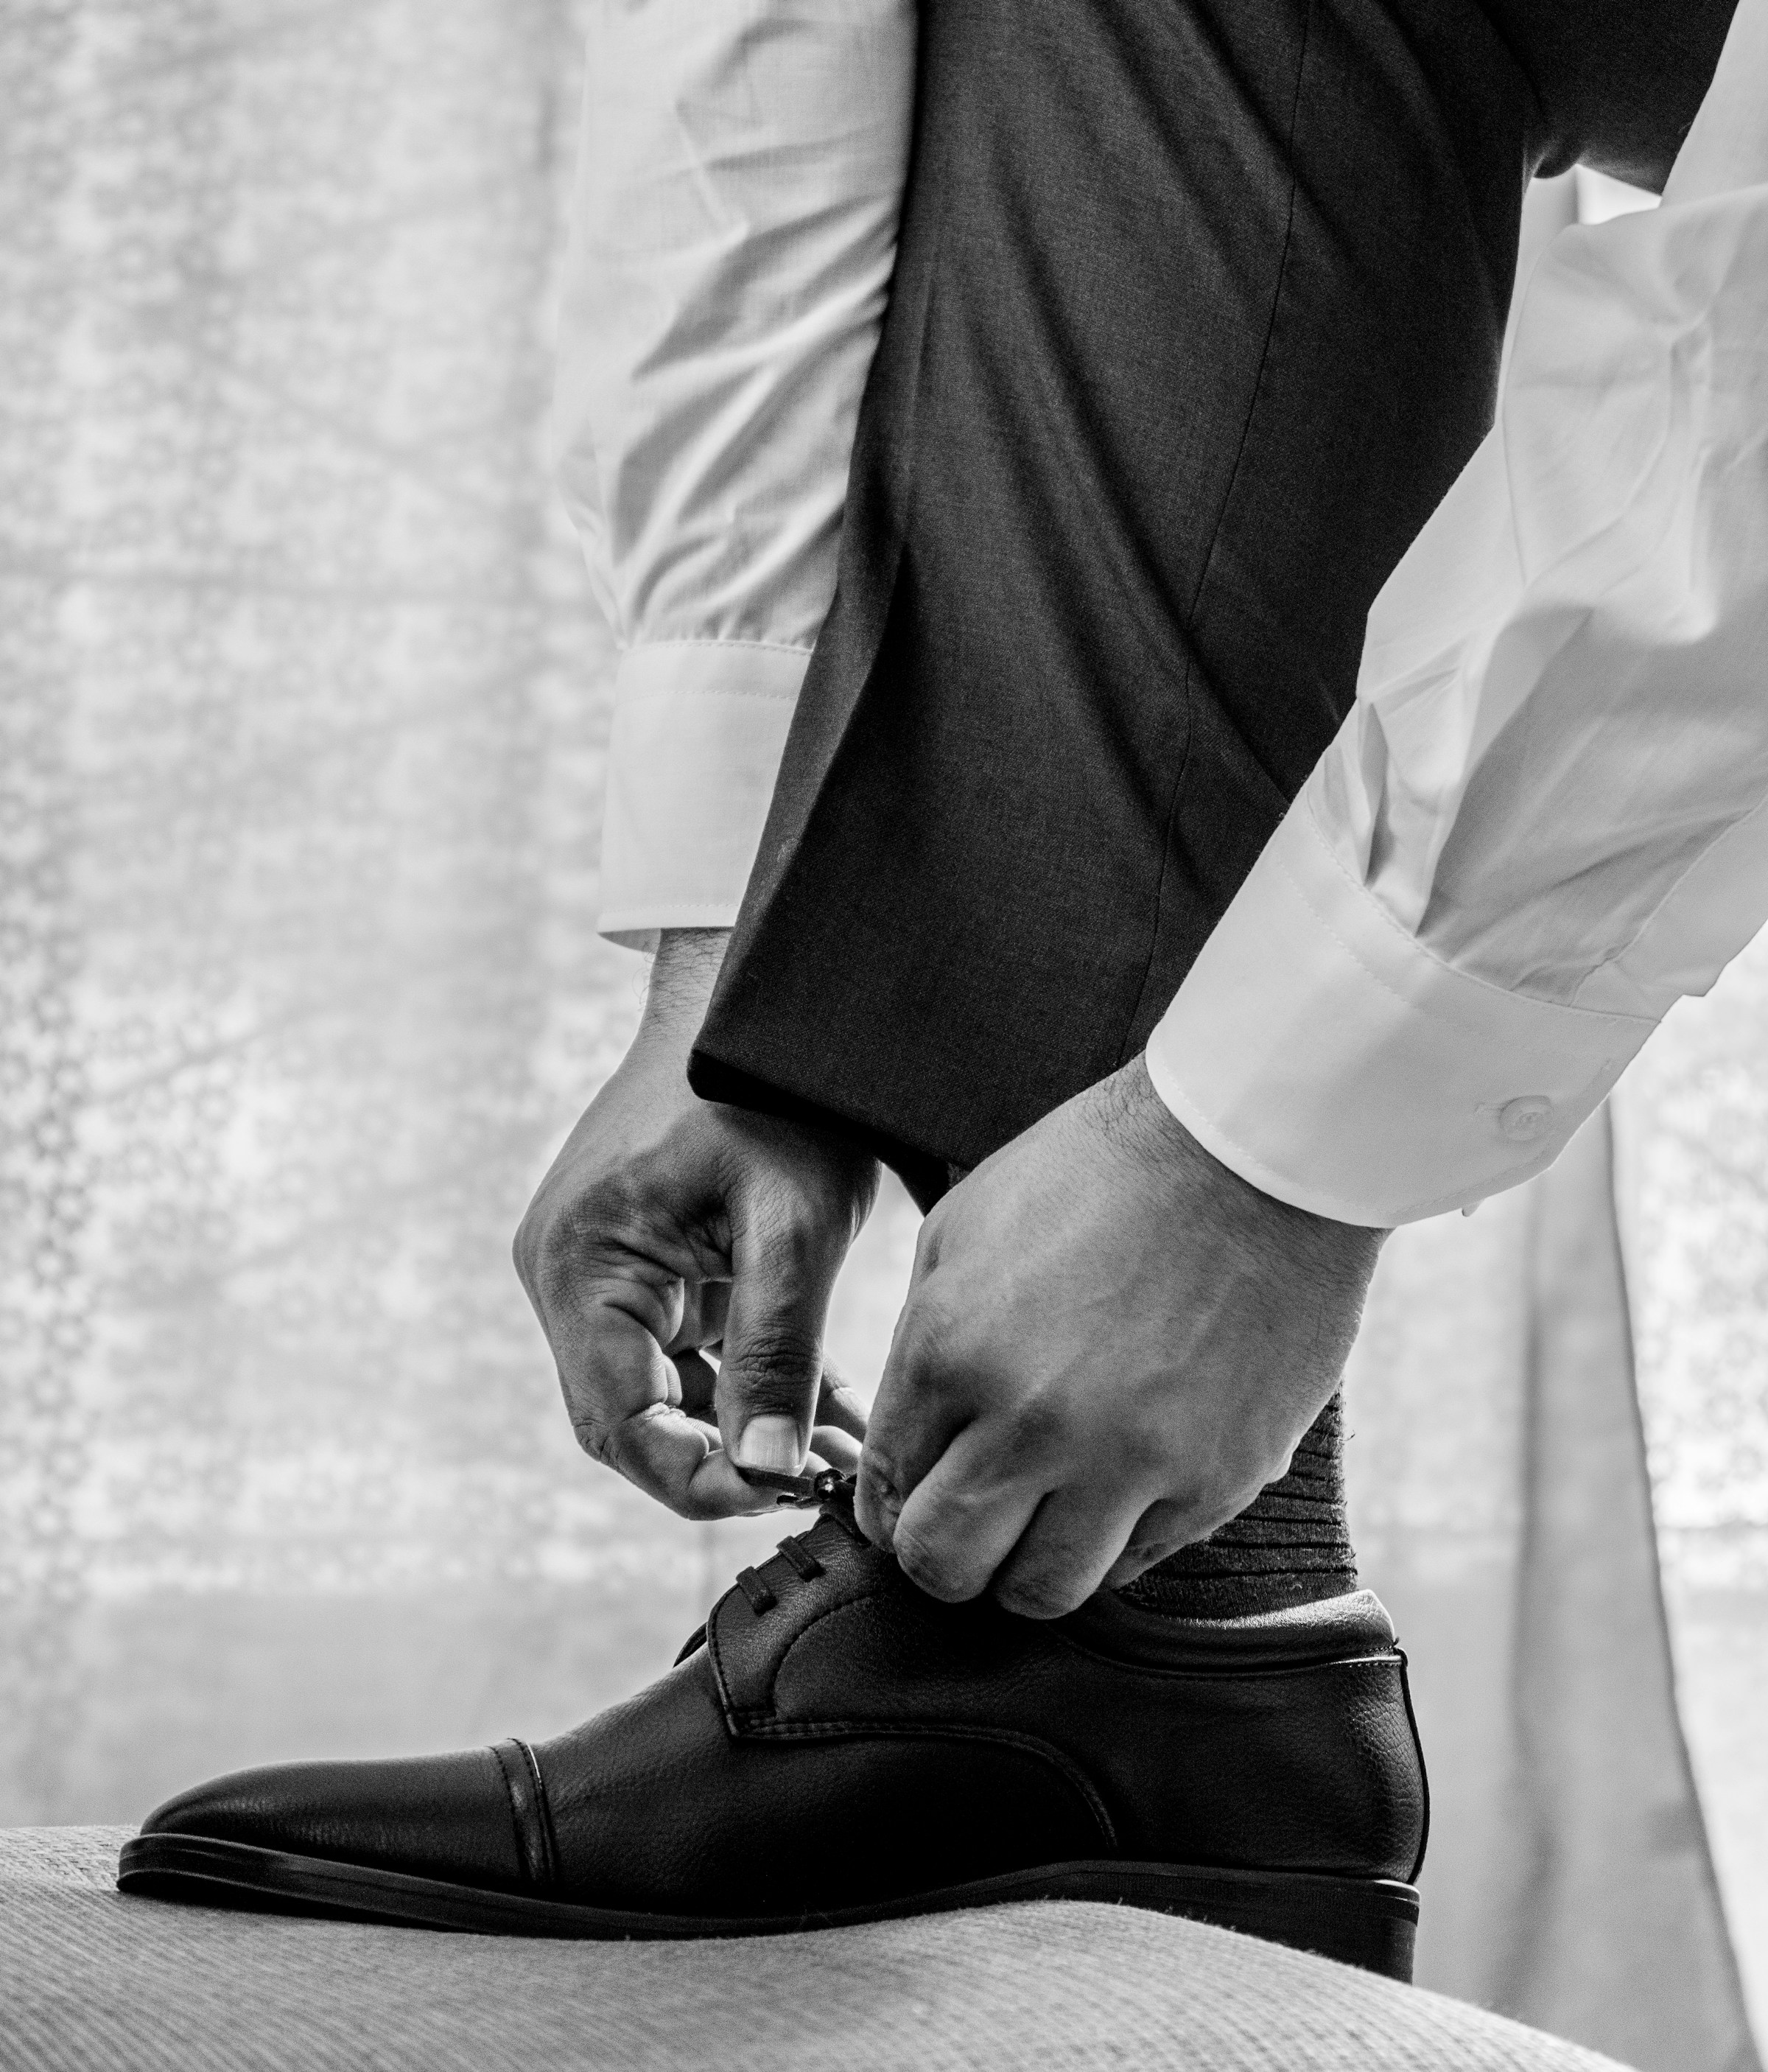 An extreme close-up shot of a man in a white dress shirt and black pants wearing black leather shoes | Source: Unsplash